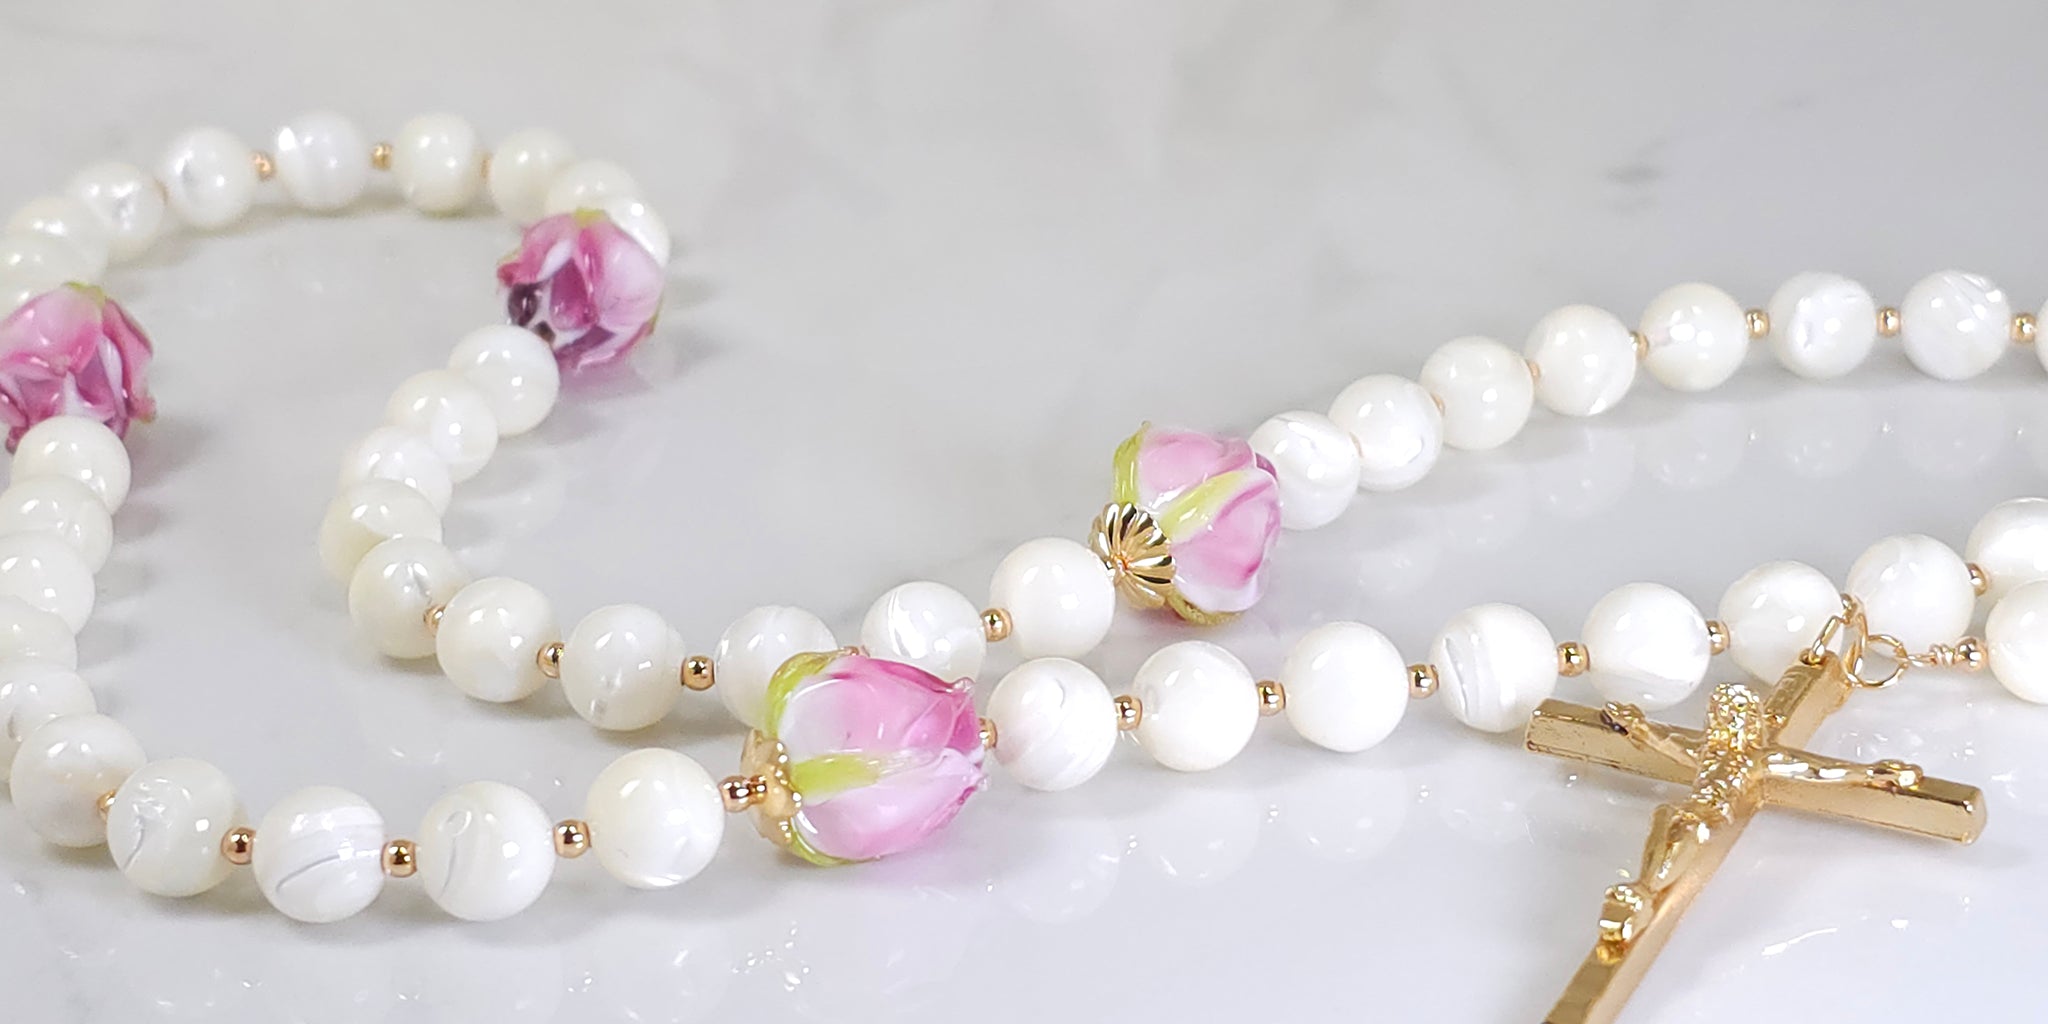 White Mother of Pearl Catholic Rosary Beads with Gold Cross and Glass Rose buds beads placed on top of white marble.